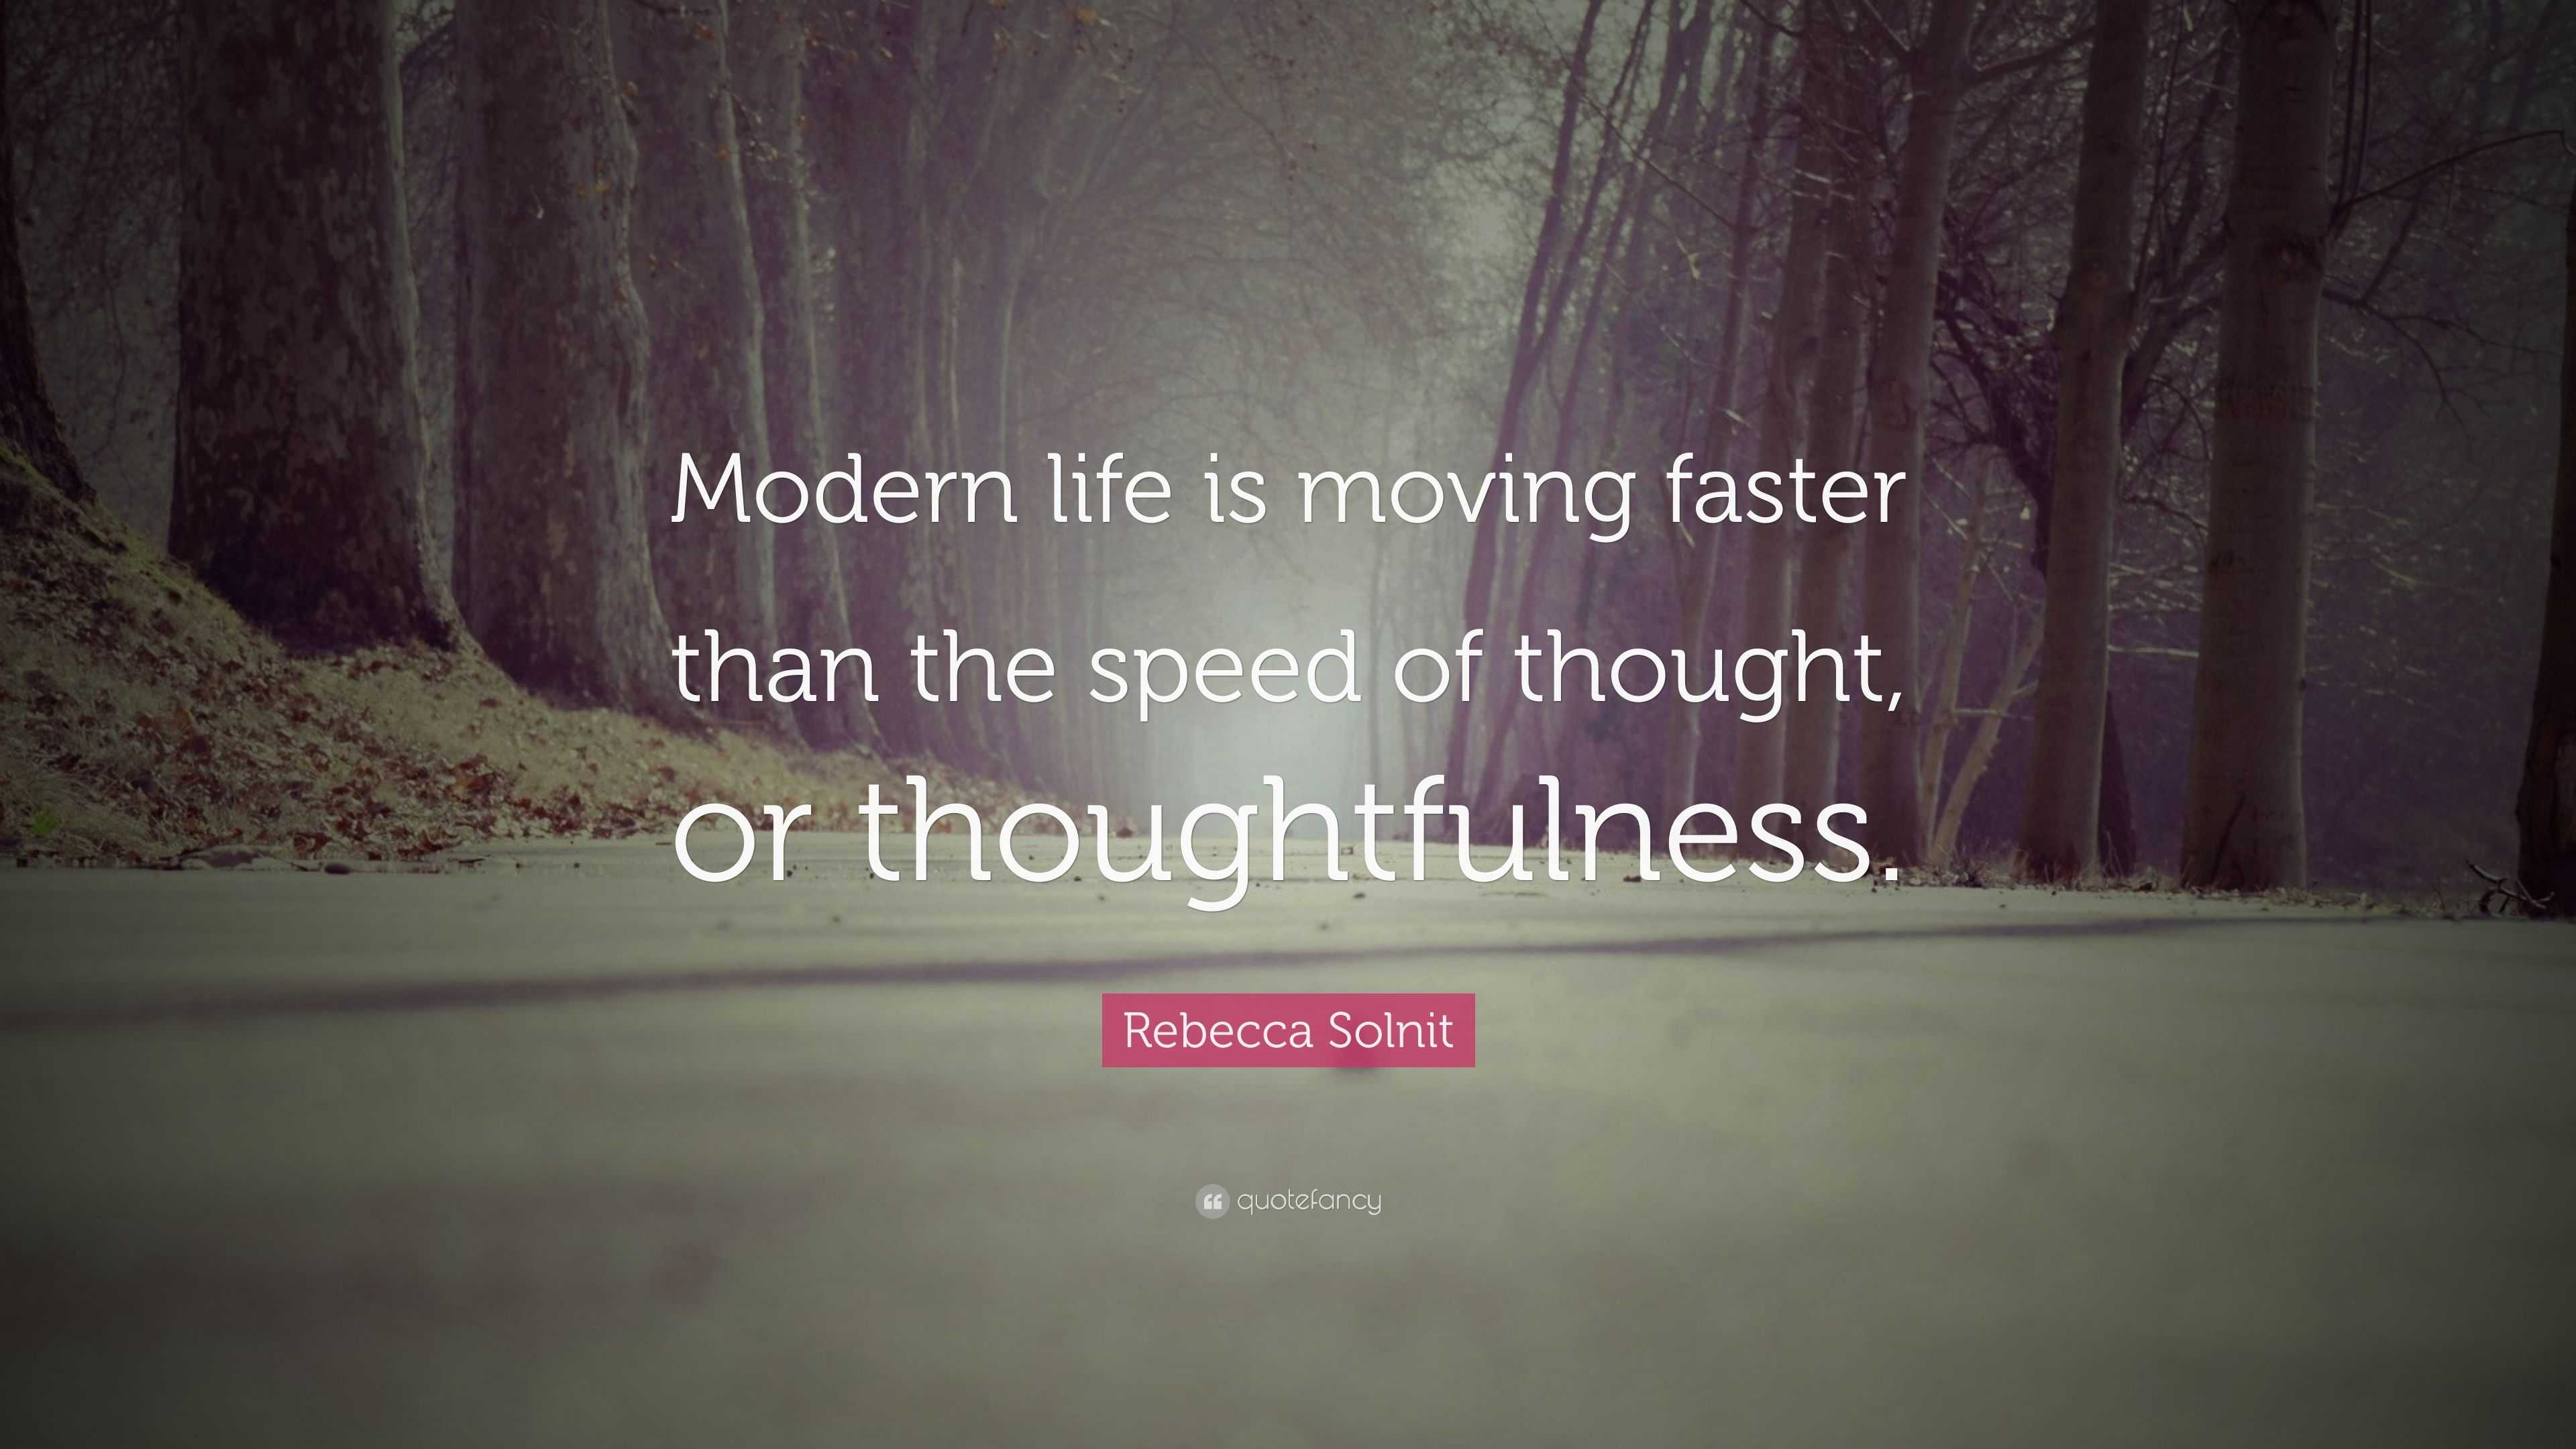 Rebecca Solnit Quote: “Modern life is moving faster than the speed of ...